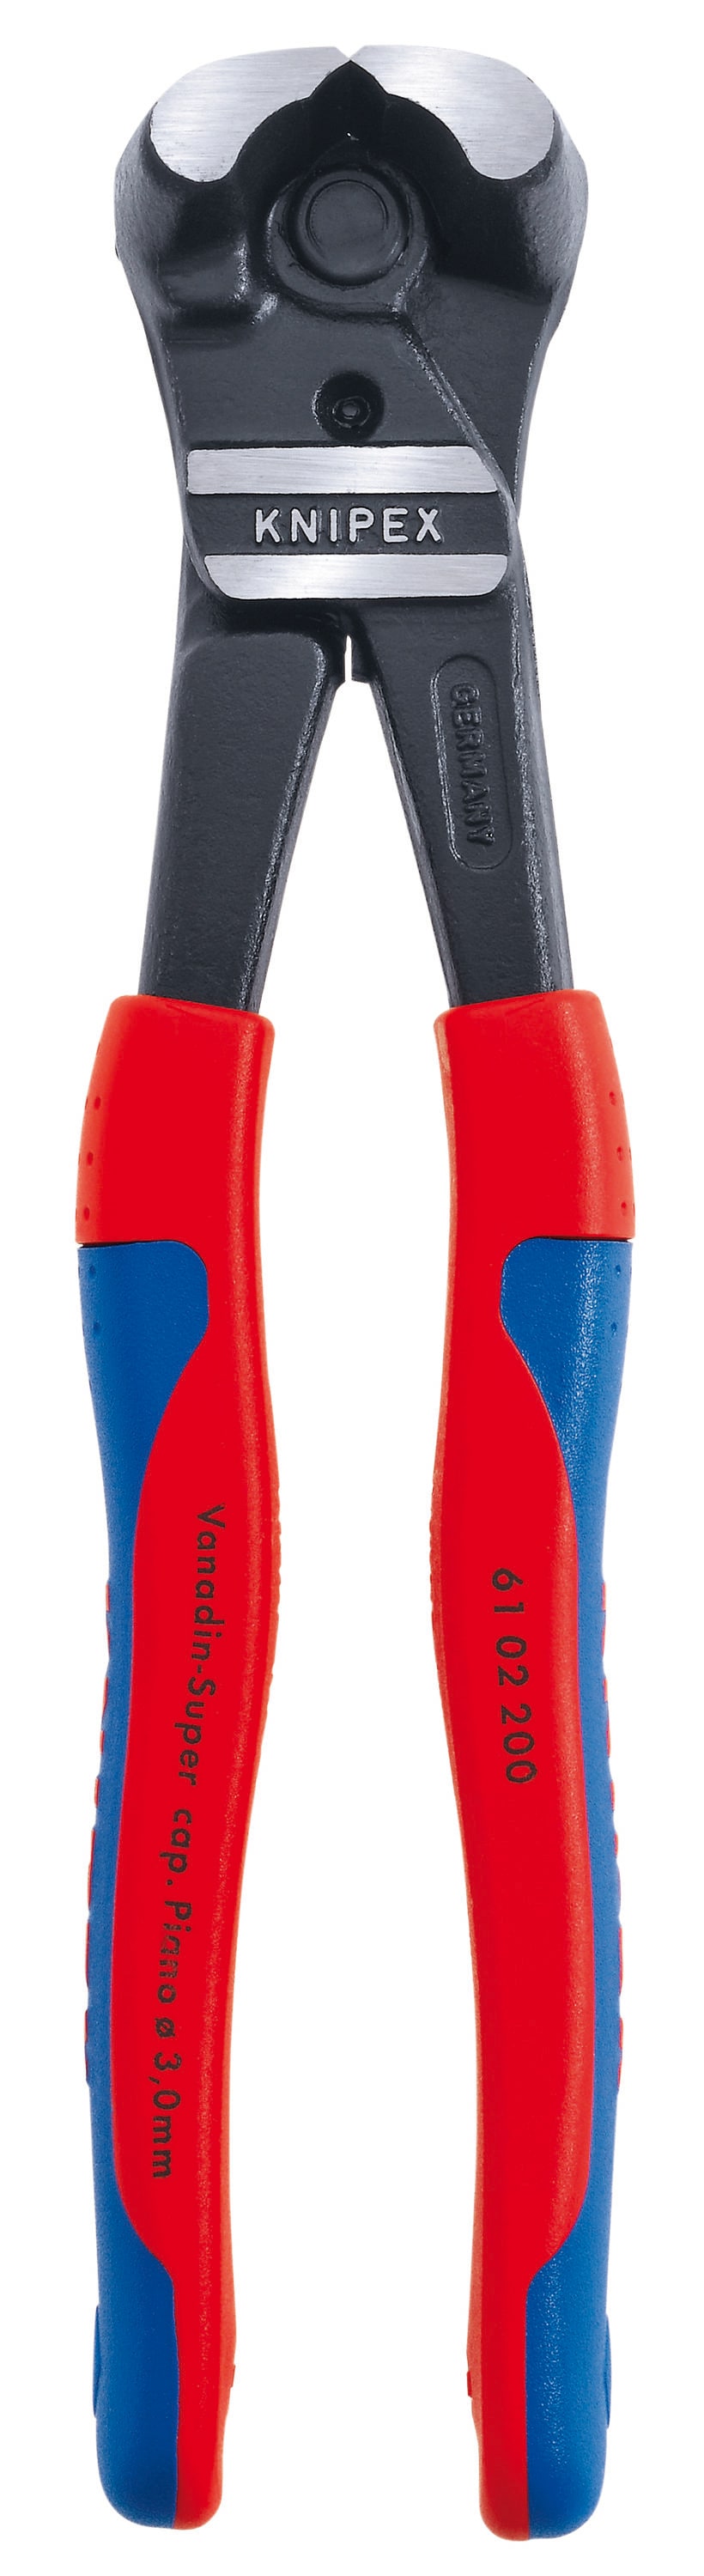 KNIPEX Home Repair End Cutting Pliers in the Cutting Pliers 